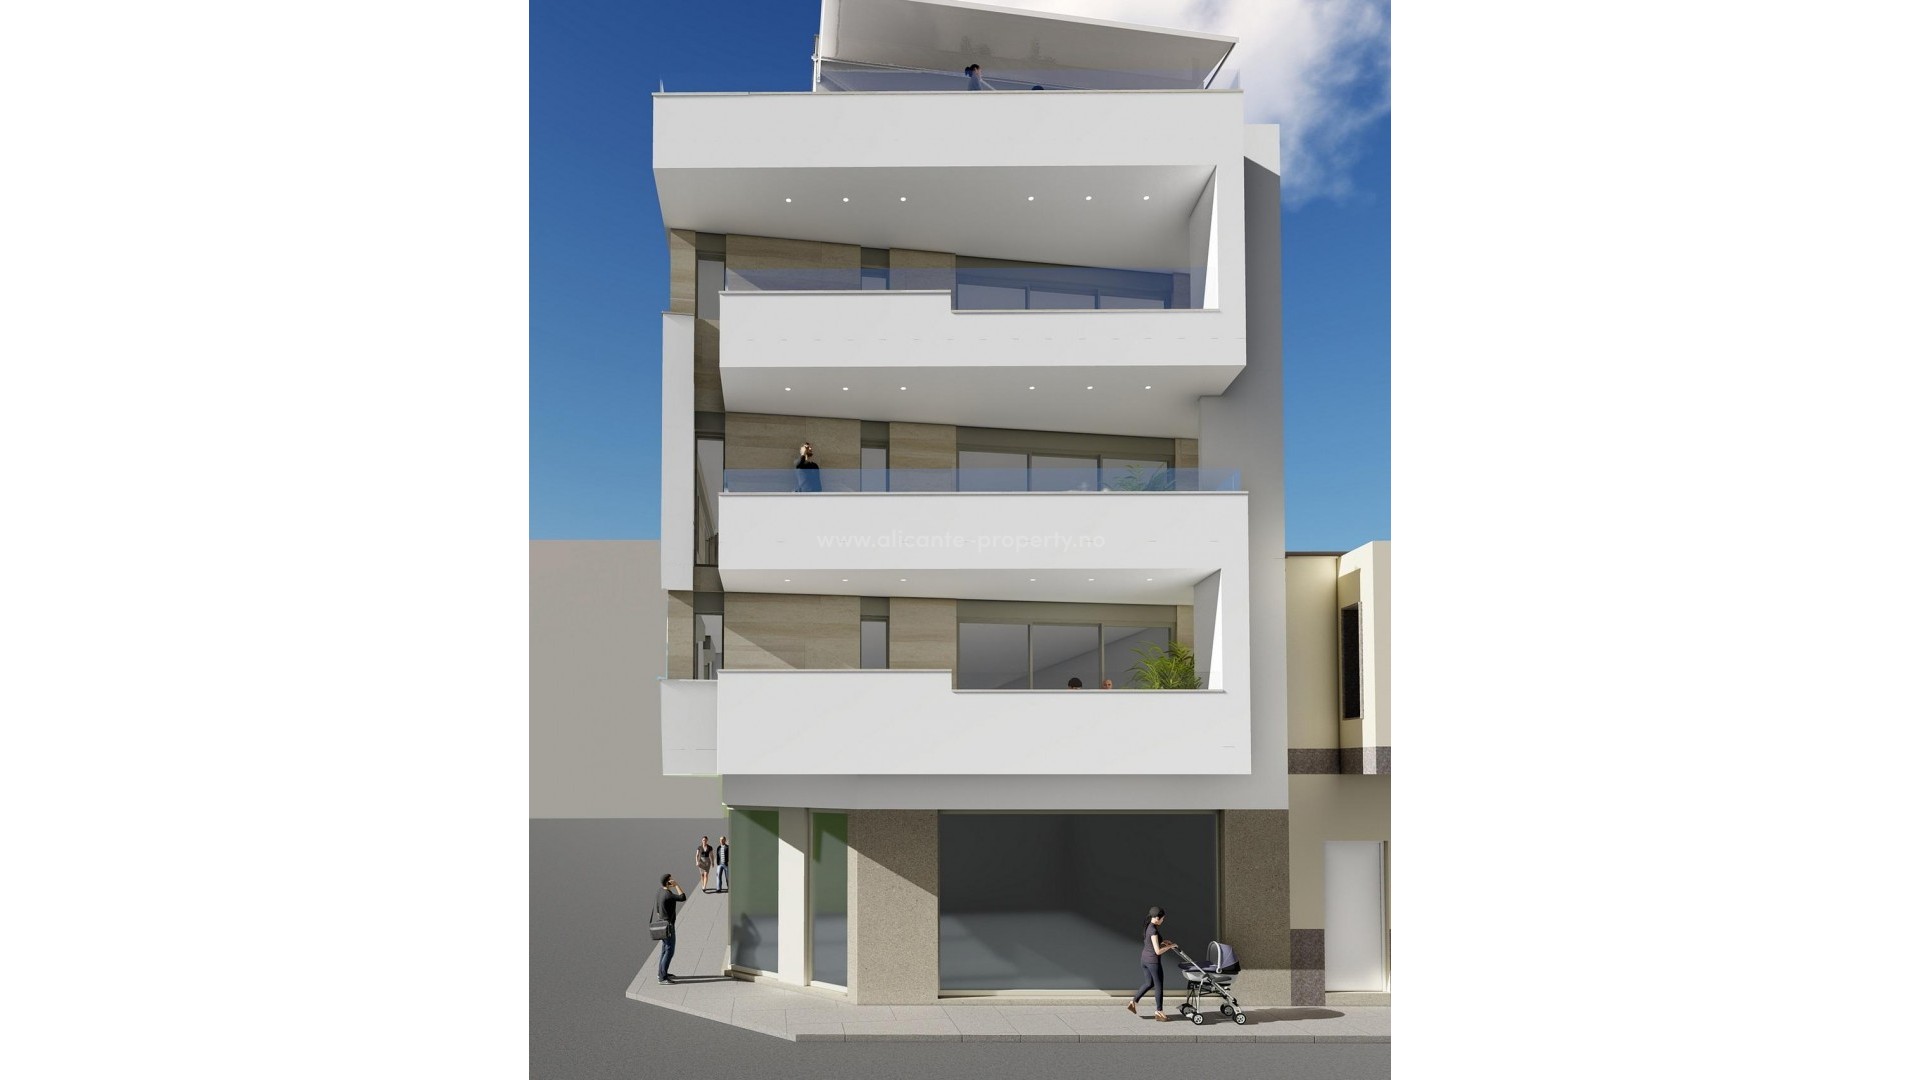 16 homes in Torrevieja near Los Locos beach, 1/2/3 bedrooms, 1/2 bathrooms, terraces from 7m2 to 55m2, communal solarium, hot tub, chillout area and sauna